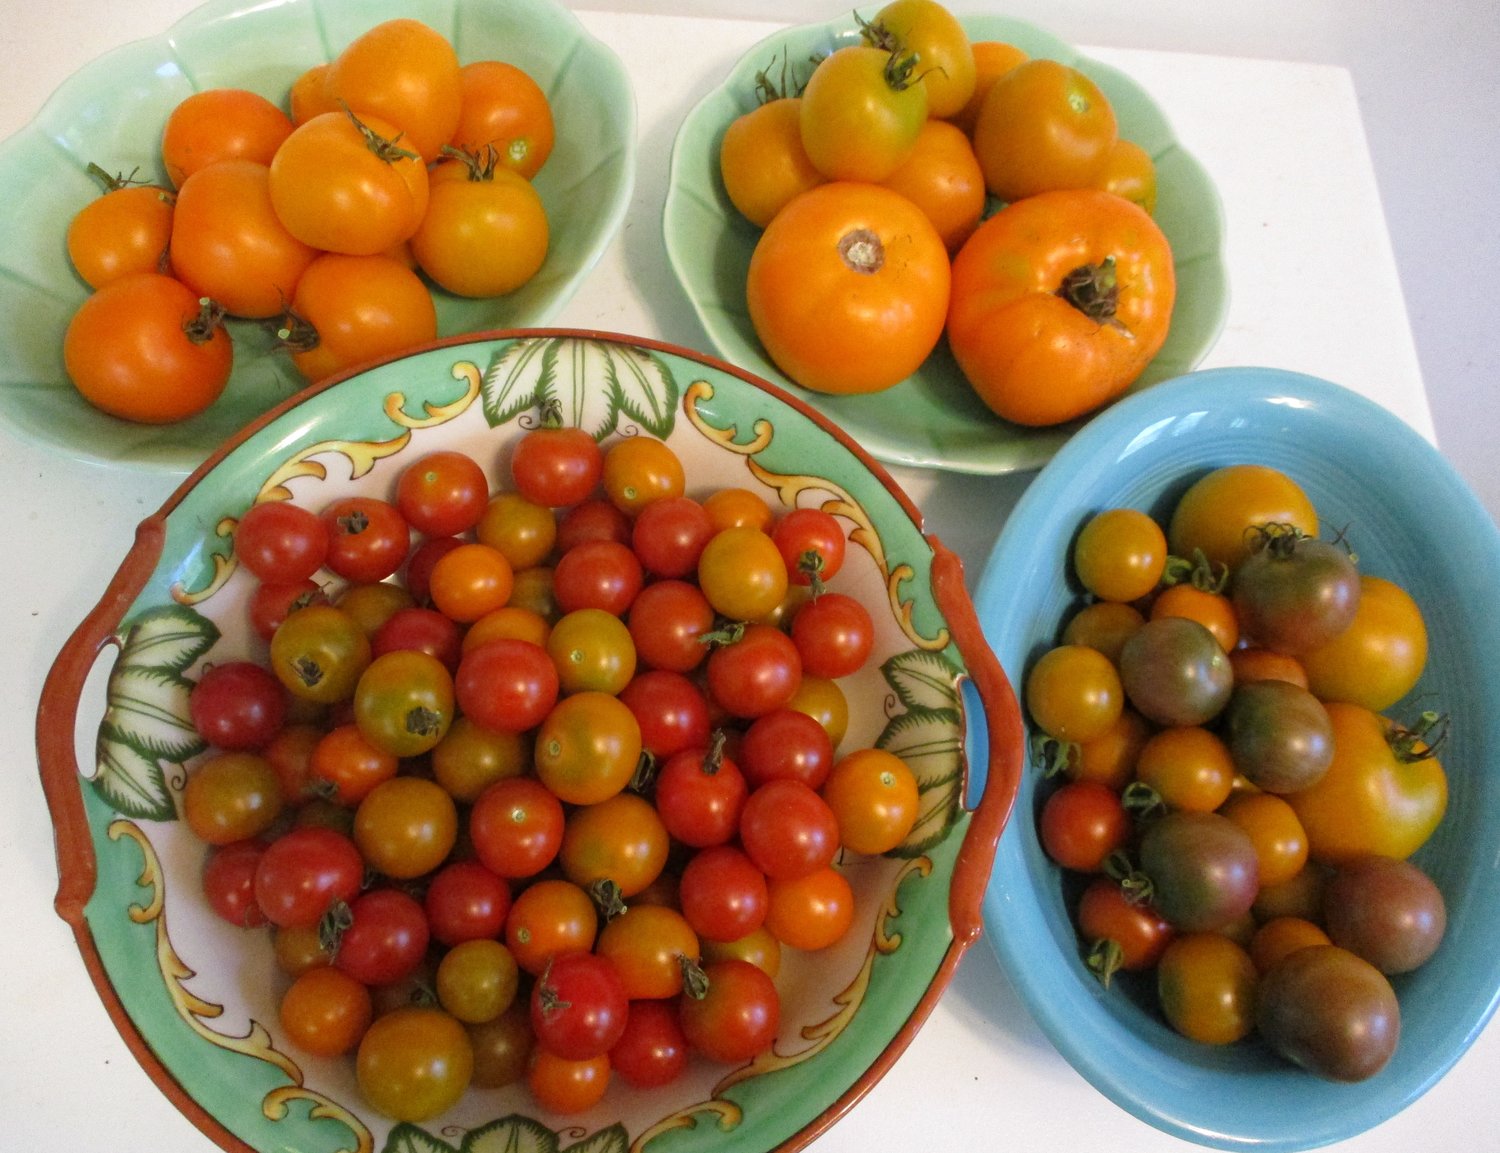 So many tomatoes! The garden had an abundance this year.